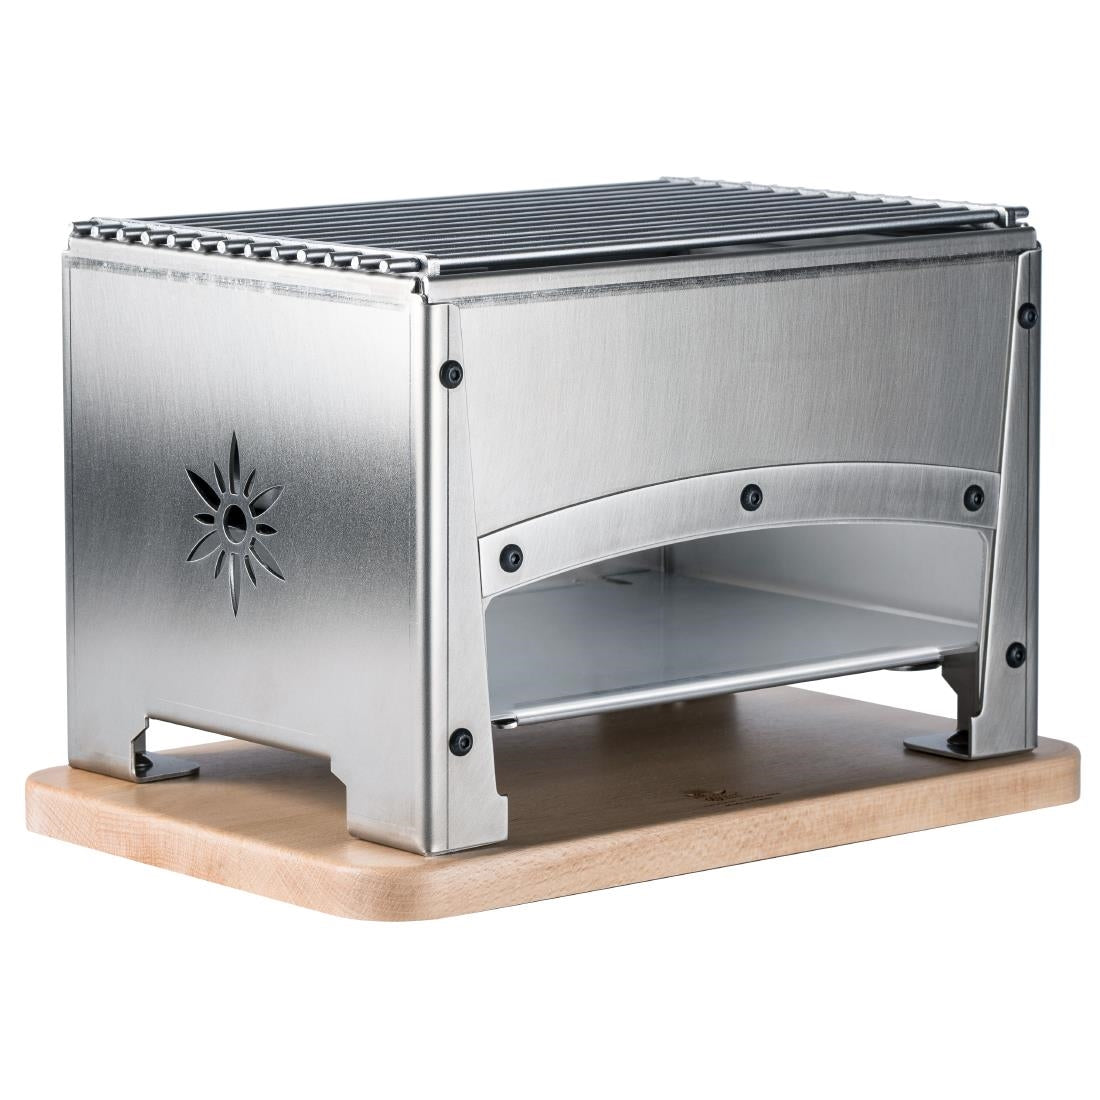 Louis Tellier Brasero Table Barbecue BRASI-F FP429 JD Catering Equipment Solutions Ltd